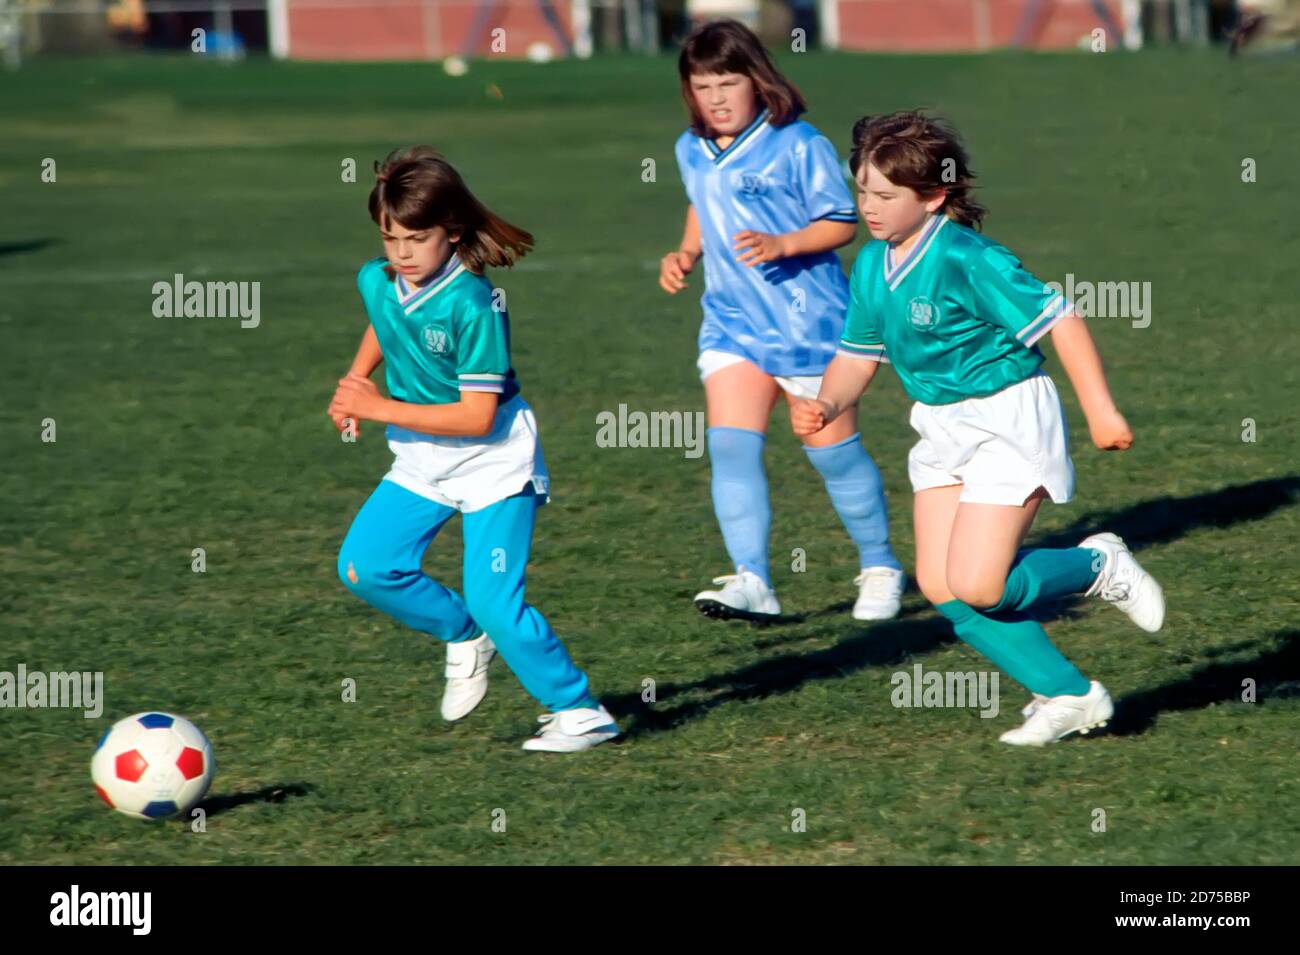 Girls 9 to 11 years old play organized soccer or football Stock Photo